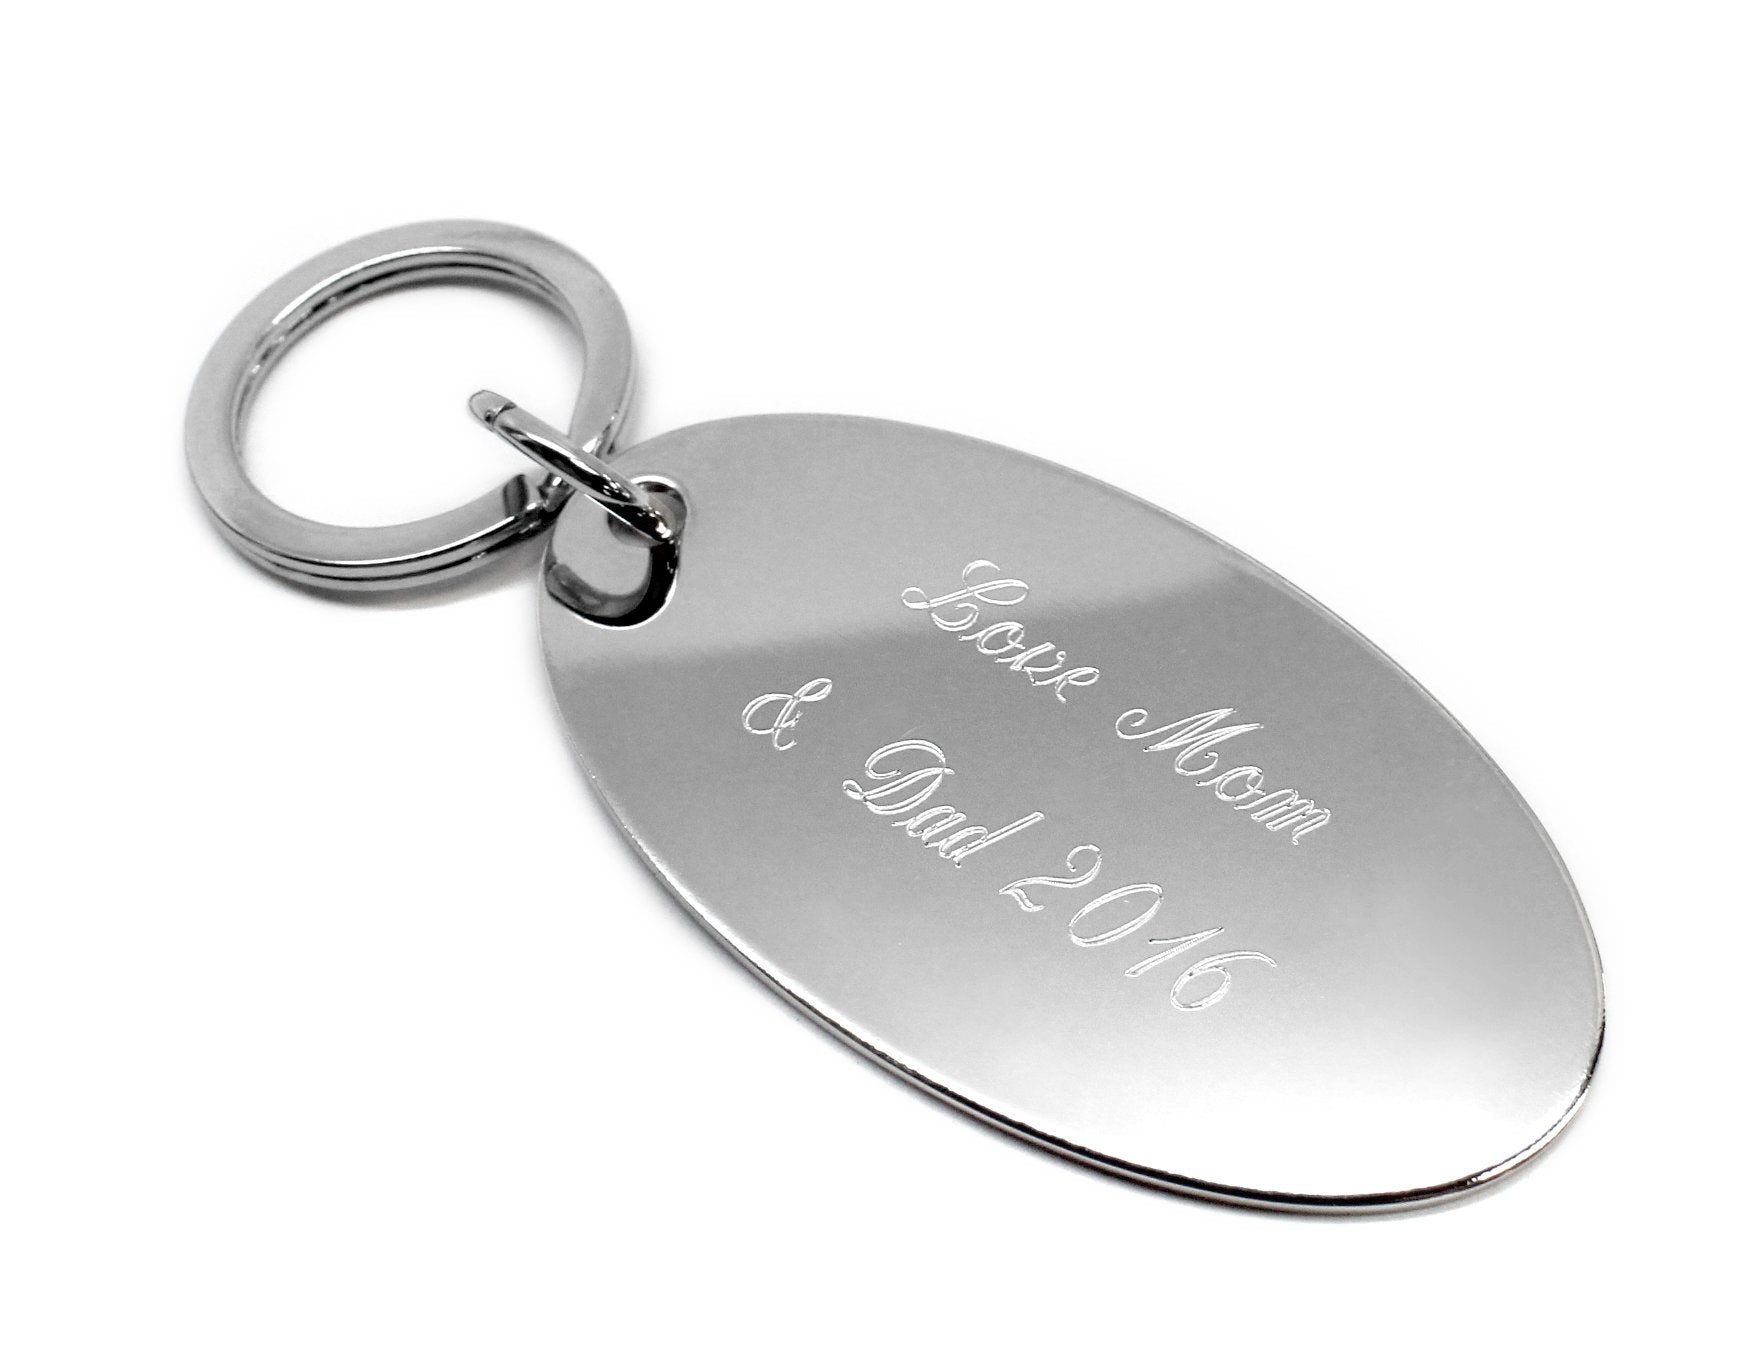 JewelryEveryday Anniversary Gift | Personalized Hooked Aluminum Keychain Hook Charm Silver / Add Date Below and Two Rows on Back